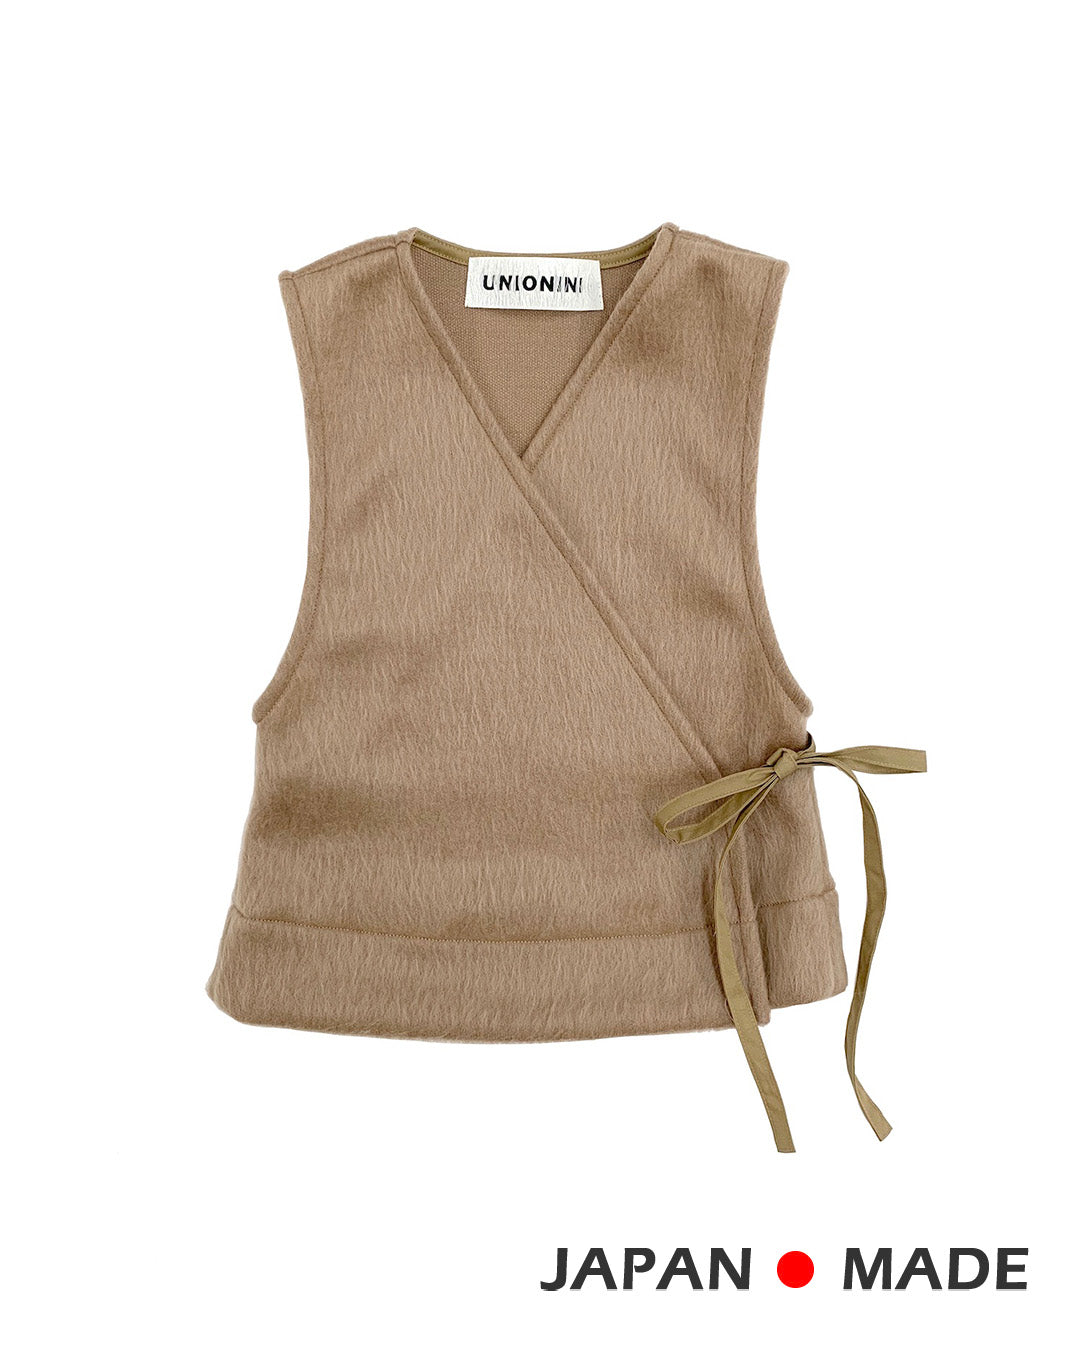 ☆reserve☆  UNIONINI / Unionini / Knit Cache-COEUR VEST (Brown) AC067 Delivery date September